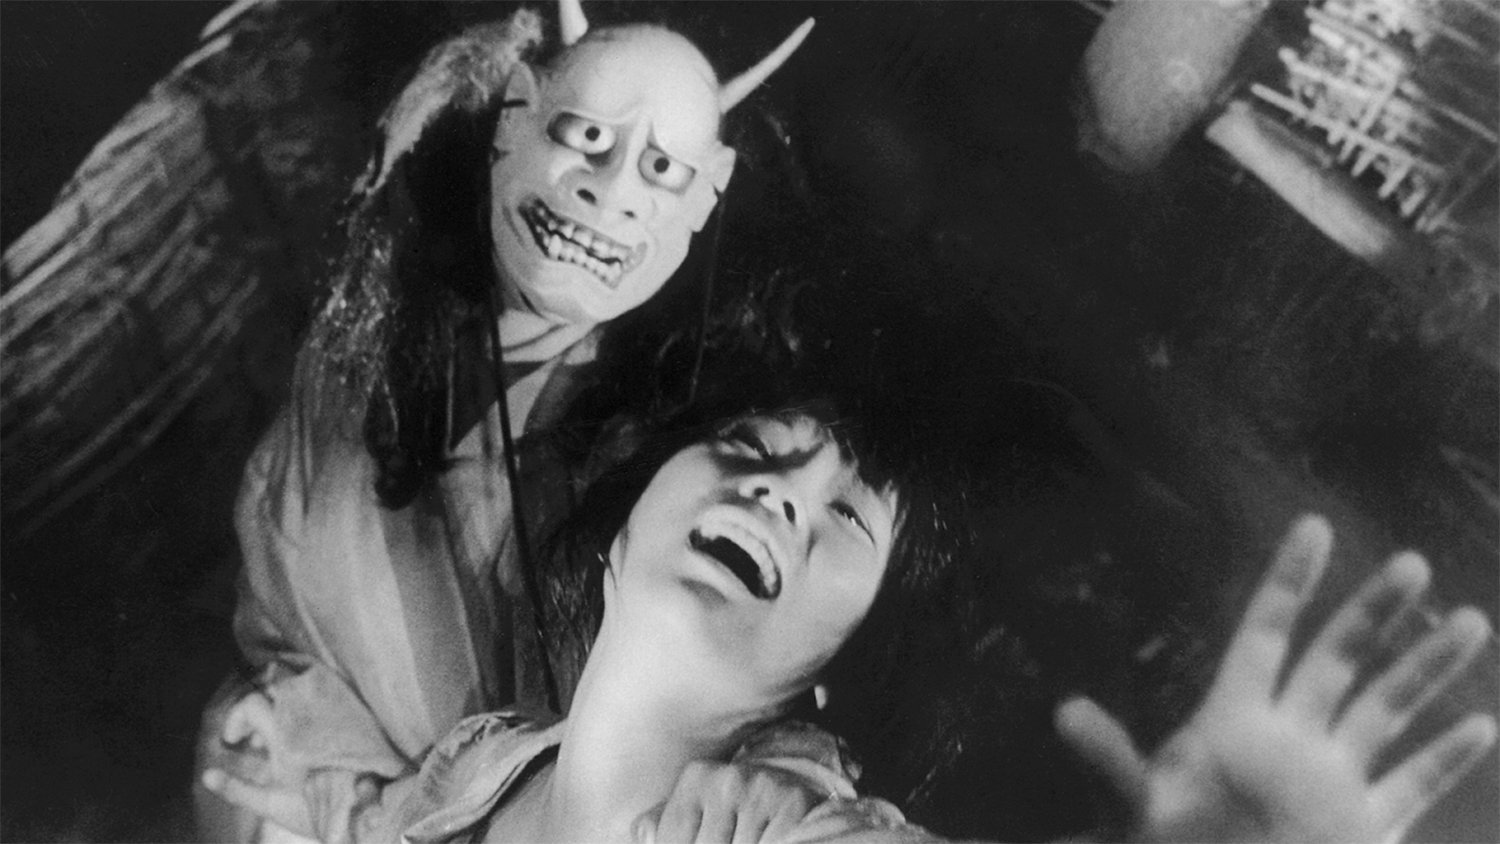 woman screaming, devil's mask, Onibaba (1964)